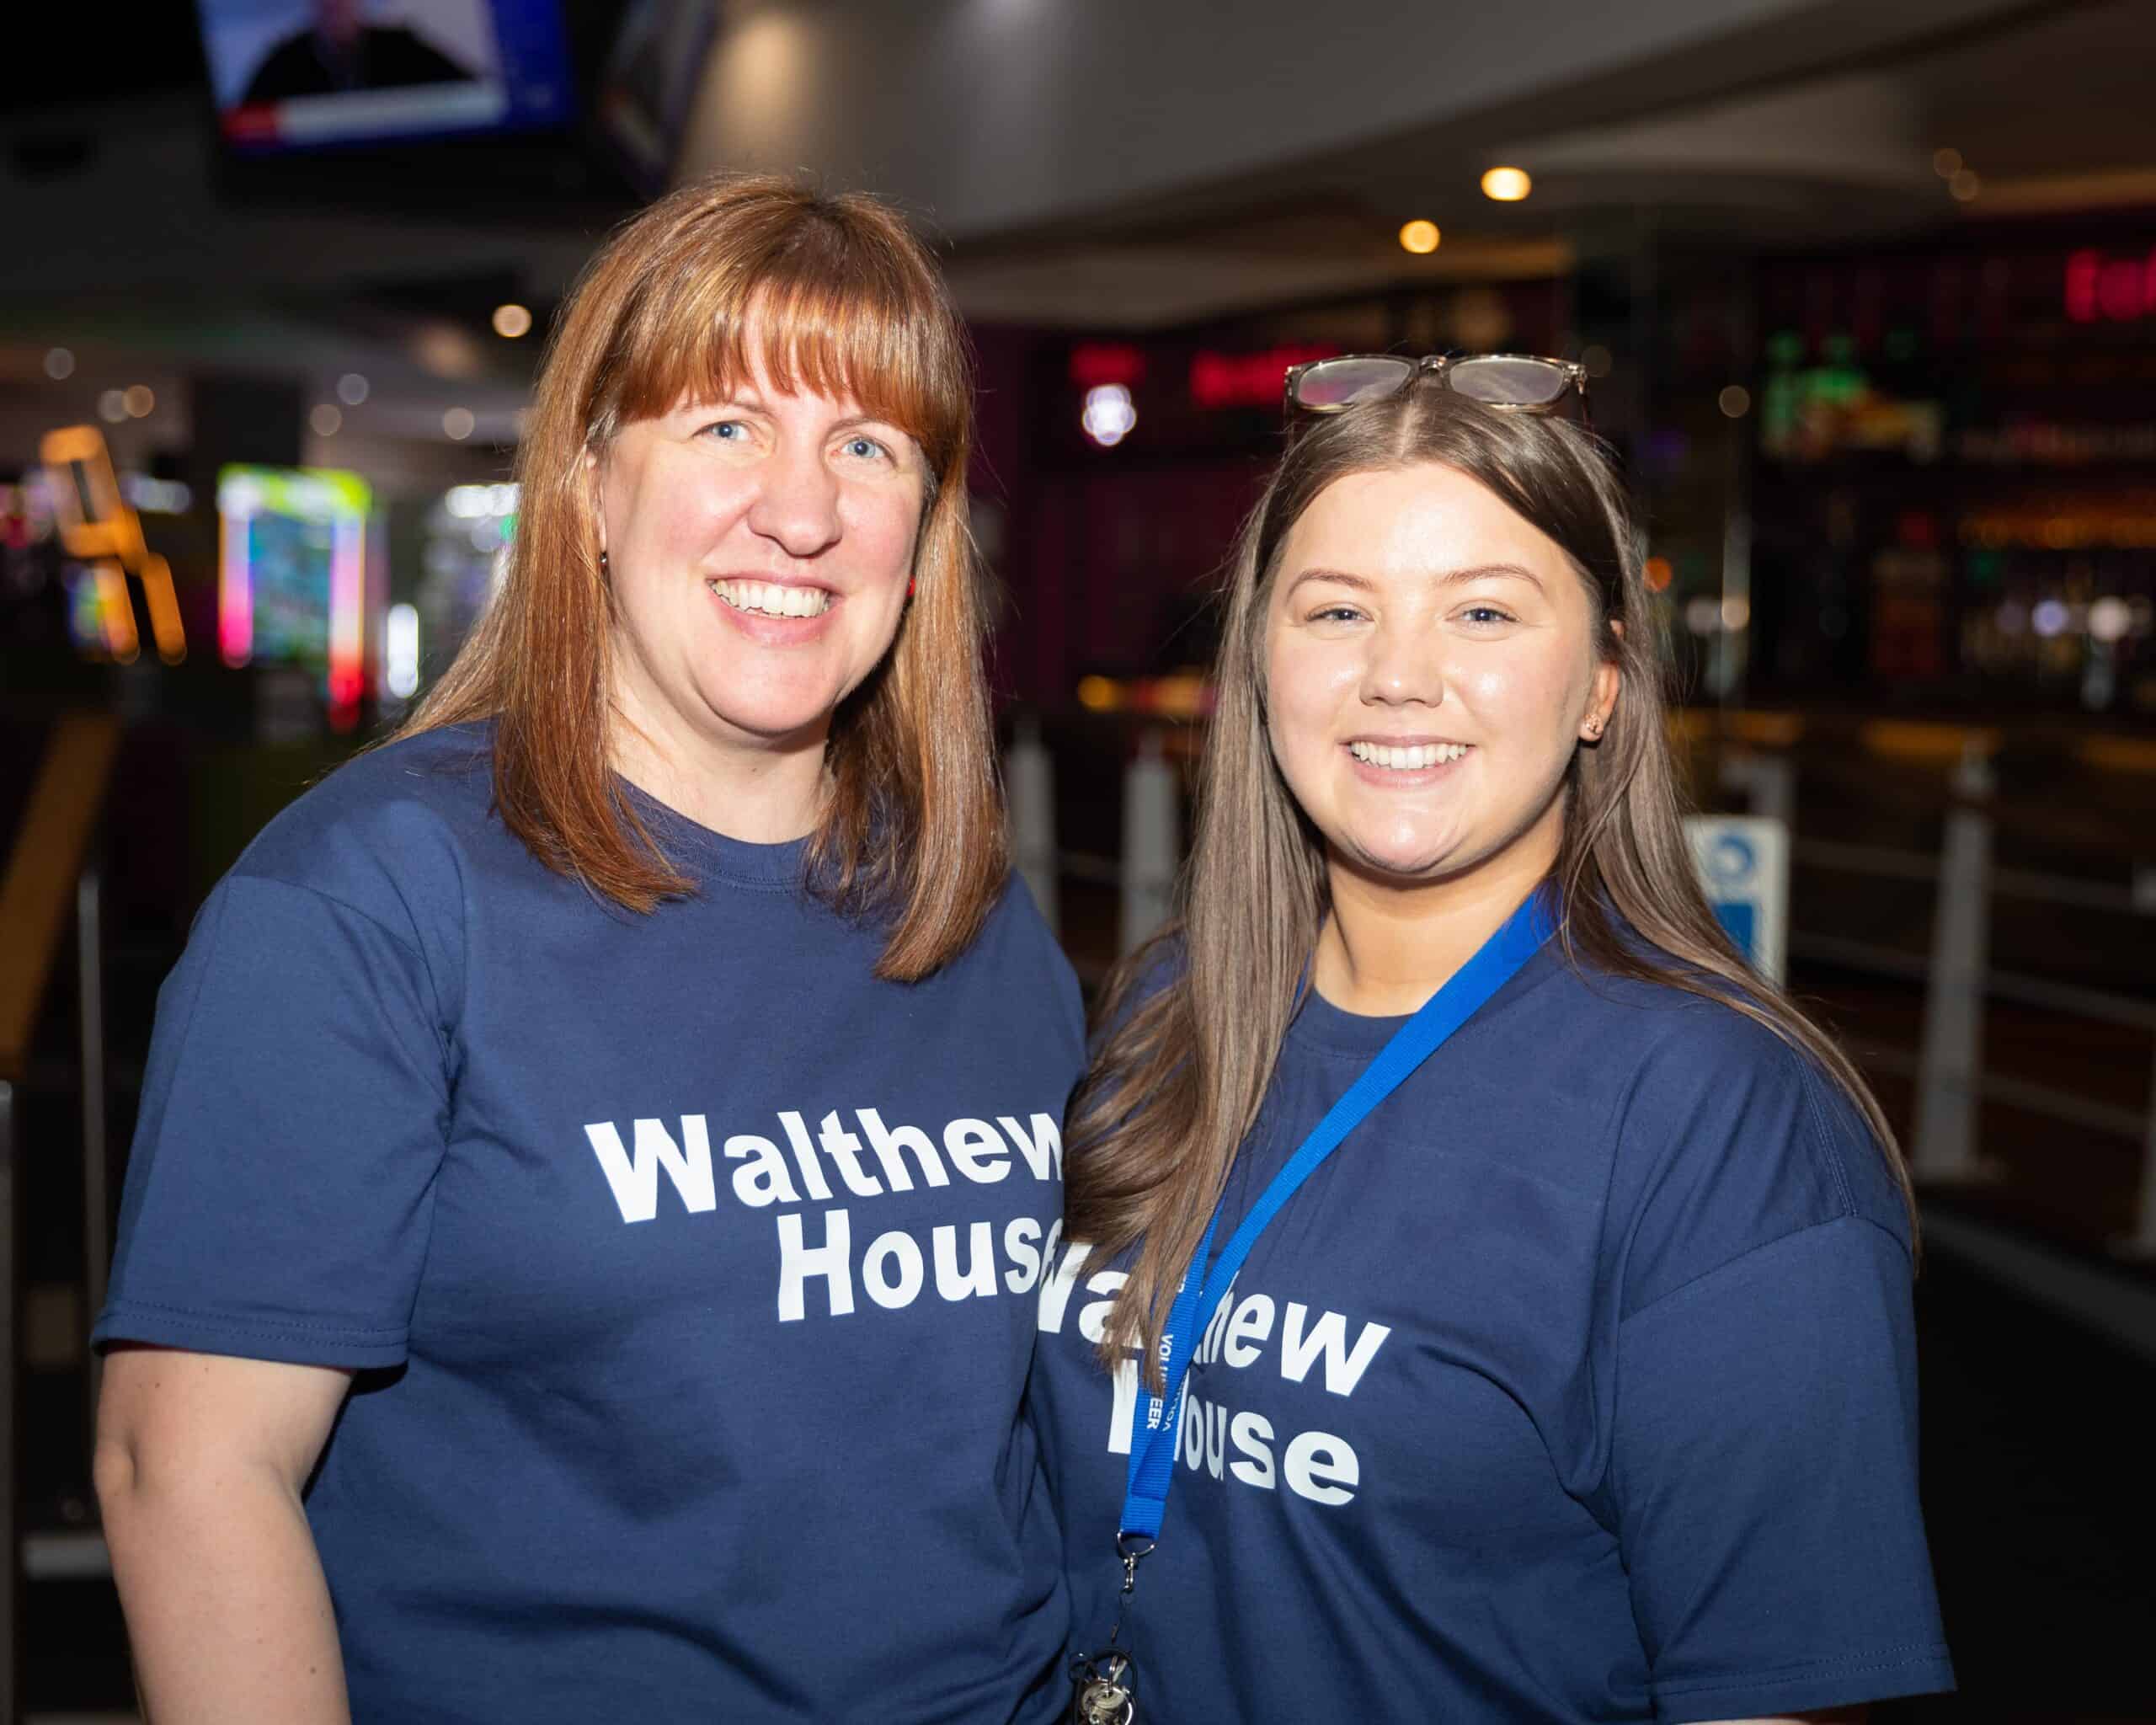 Sarah and Shannon in Walthew House t-shirts.